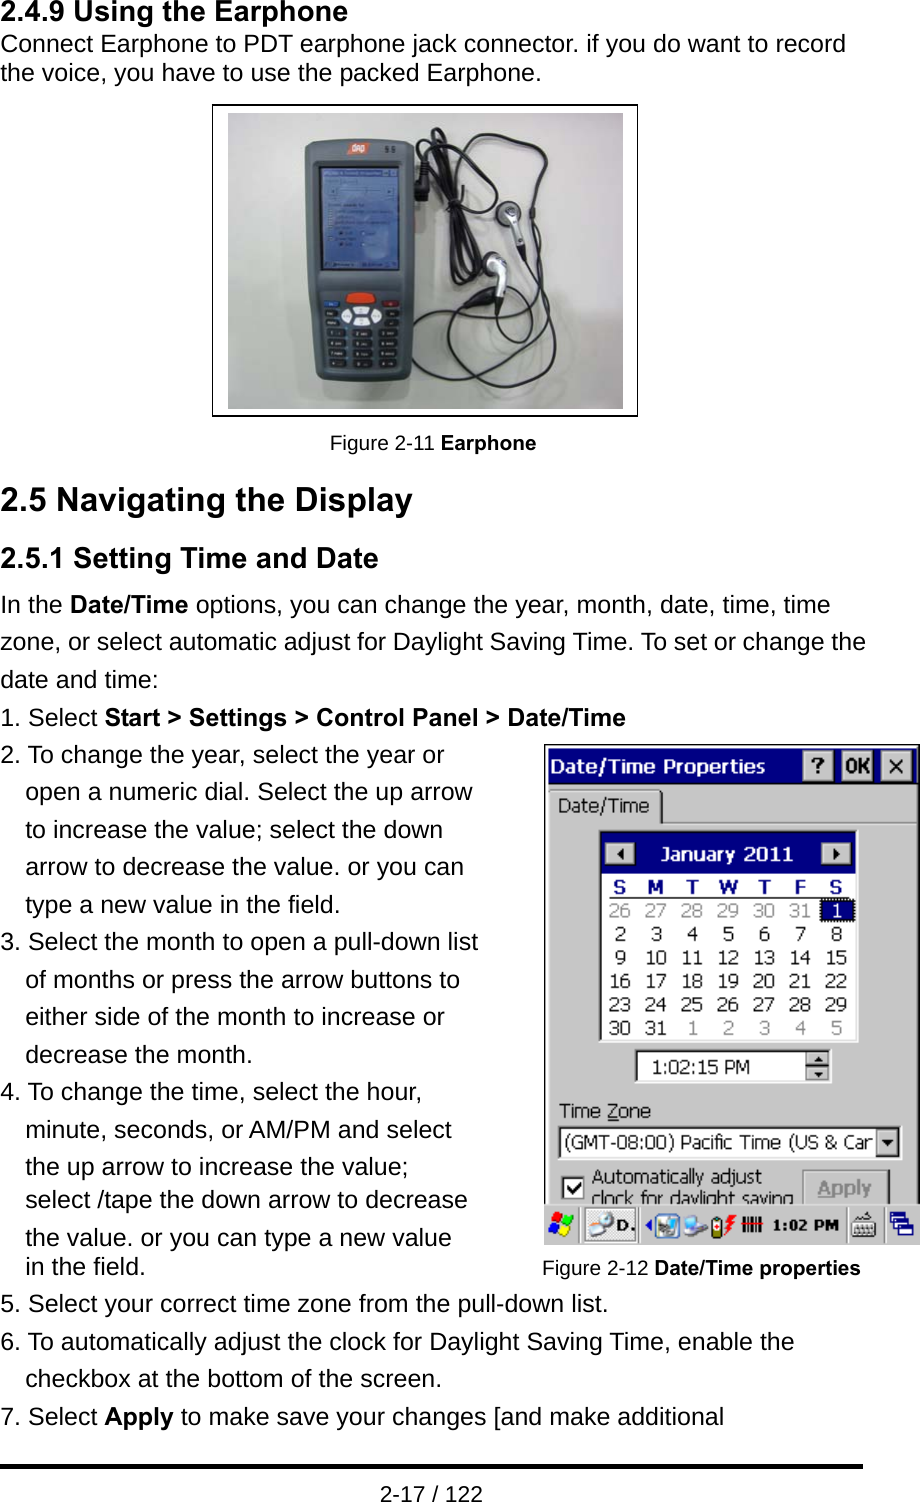  2-17 / 122 2.4.9 Using the Earphone Connect Earphone to PDT earphone jack connector. if you do want to record the voice, you have to use the packed Earphone.          Figure 2-11 Earphone 2.5 Navigating the Display 2.5.1 Setting Time and Date In the Date/Time options, you can change the year, month, date, time, time zone, or select automatic adjust for Daylight Saving Time. To set or change the date and time: 1. Select Start &gt; Settings &gt; Control Panel &gt; Date/Time 2. To change the year, select the year or   open a numeric dial. Select the up arrow   to increase the value; select the down   arrow to decrease the value. or you can   type a new value in the field. 3. Select the month to open a pull-down list   of months or press the arrow buttons to   either side of the month to increase or   decrease the month. 4. To change the time, select the hour,           minute, seconds, or AM/PM and select the up arrow to increase the value;                 select /tape the down arrow to decrease           the value. or you can type a new value   in the field.                                      Figure 2-12 Date/Time properties 5. Select your correct time zone from the pull-down list. 6. To automatically adjust the clock for Daylight Saving Time, enable the checkbox at the bottom of the screen. 7. Select Apply to make save your changes [and make additional 